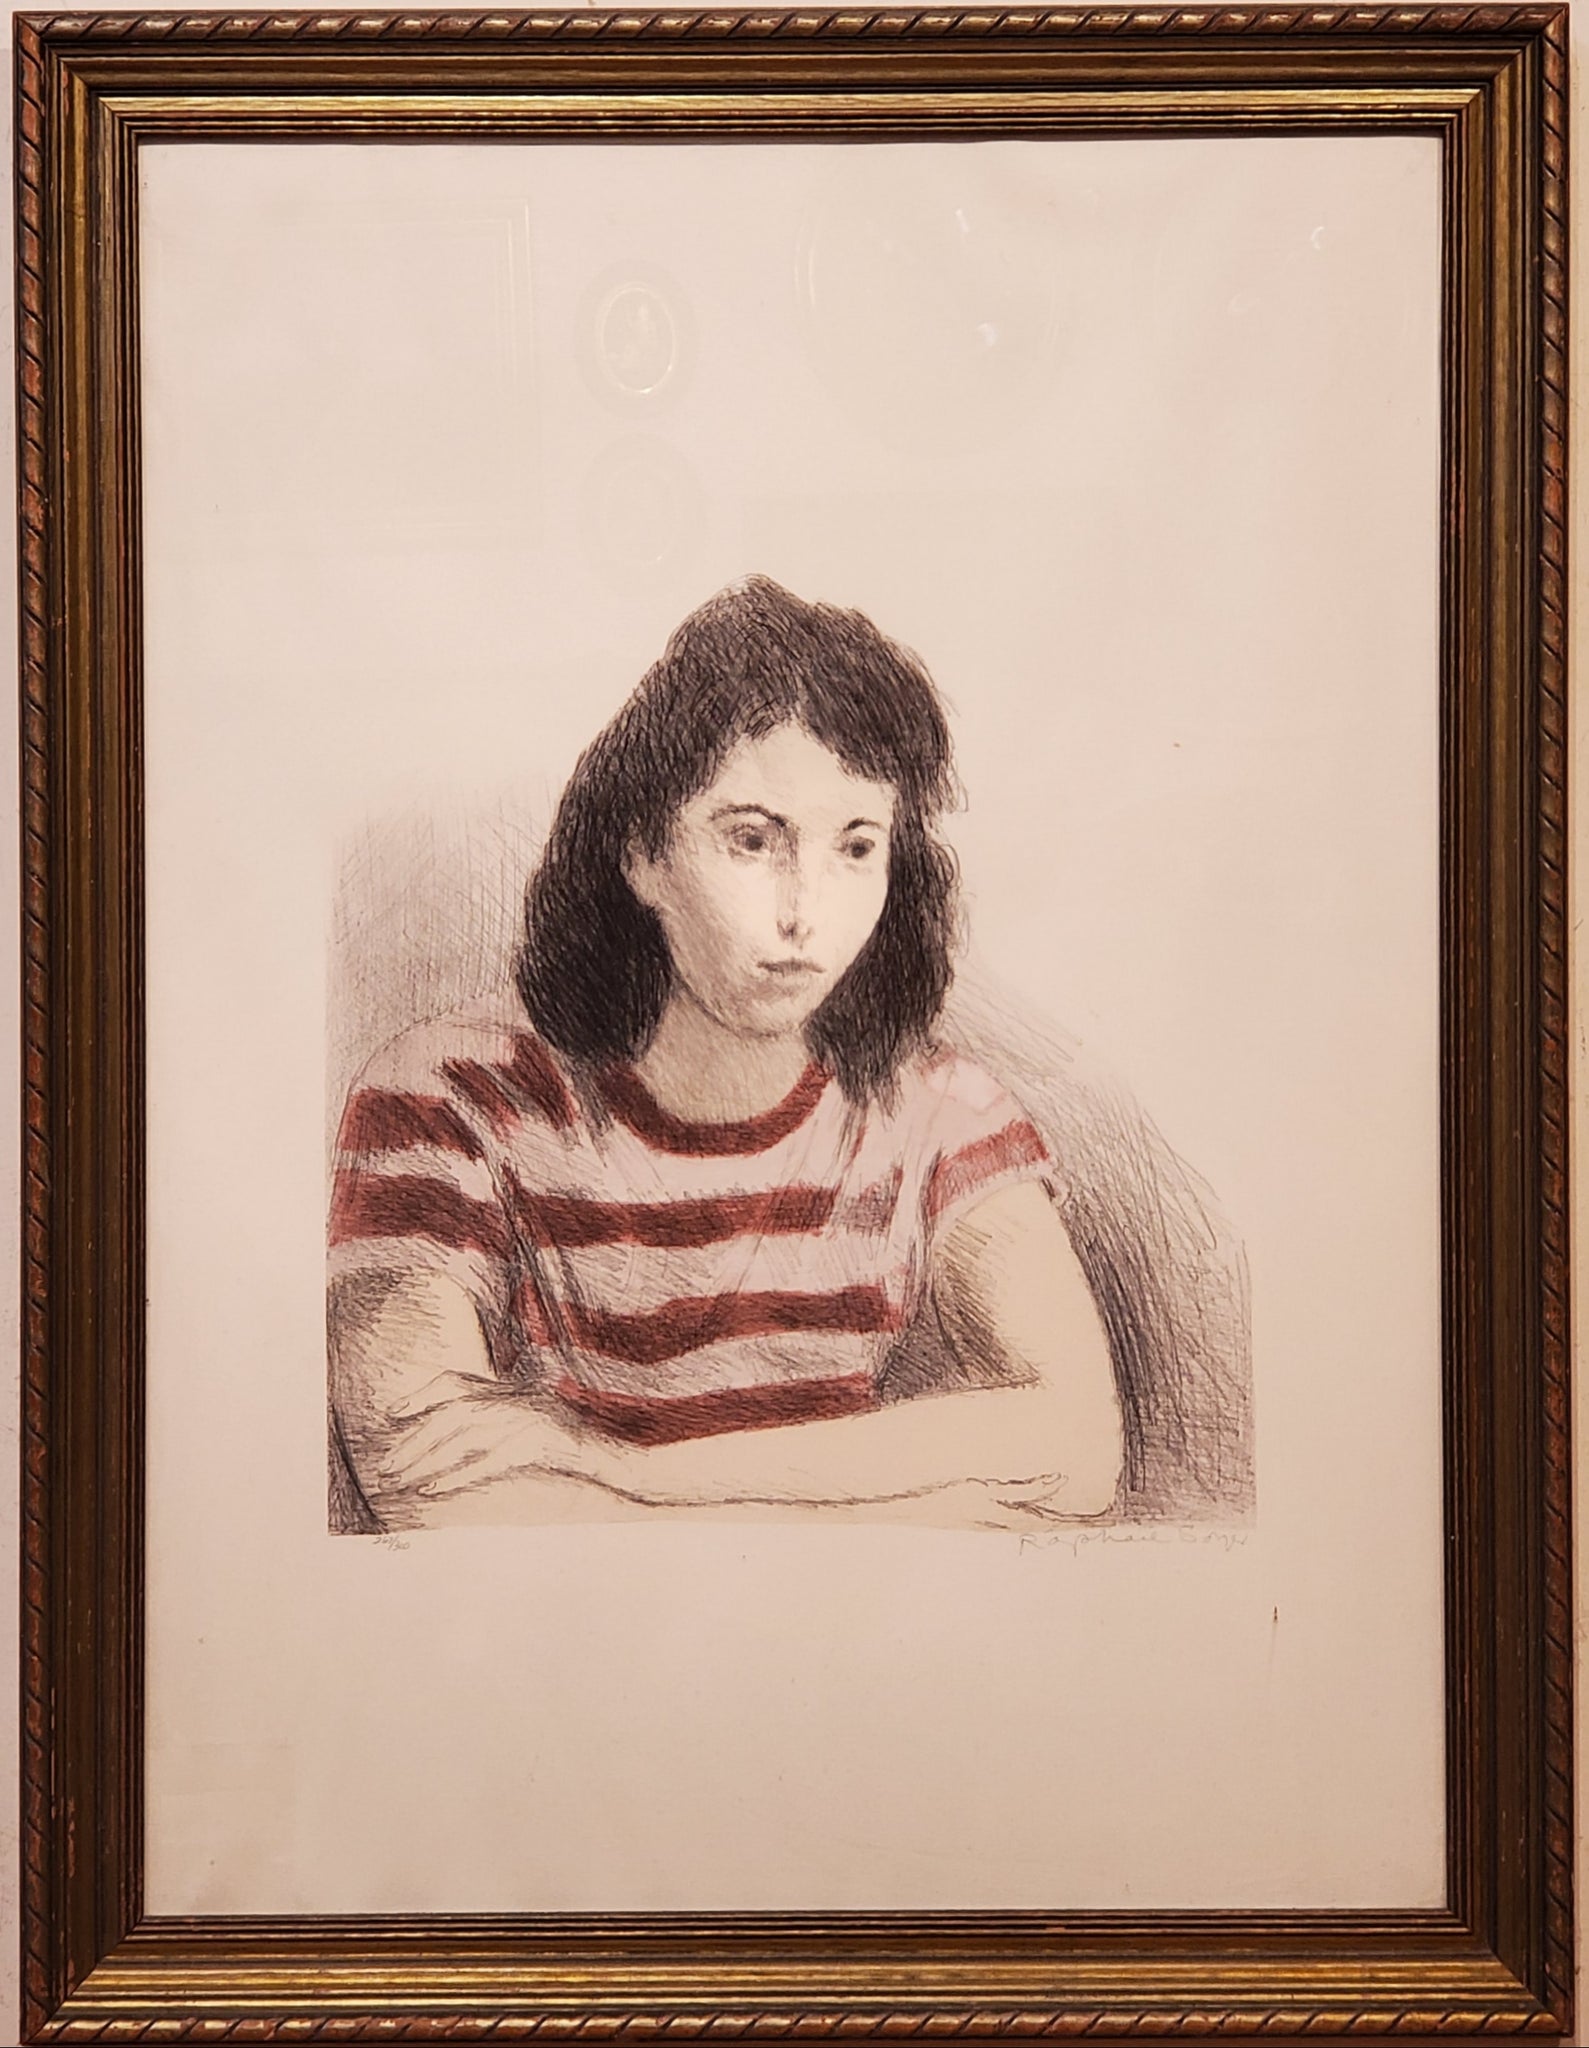 Framed Lithograph of a Woman by Raphael Soyer (1899-1987)